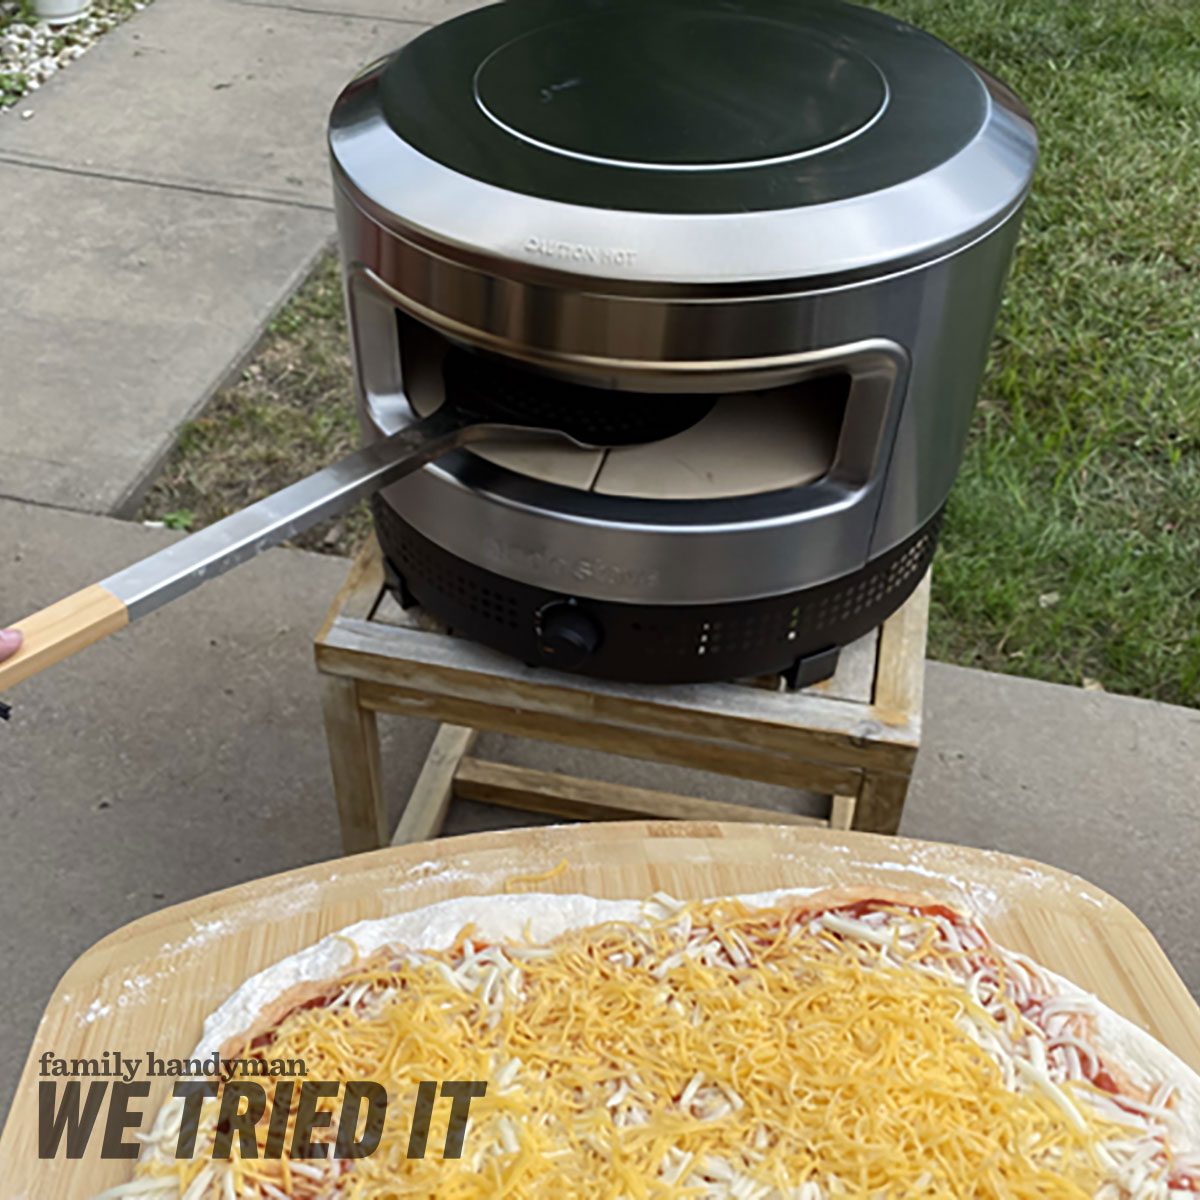 Pizza Lovers Rejoice: Top Solo Stove Pi Accessories You Need